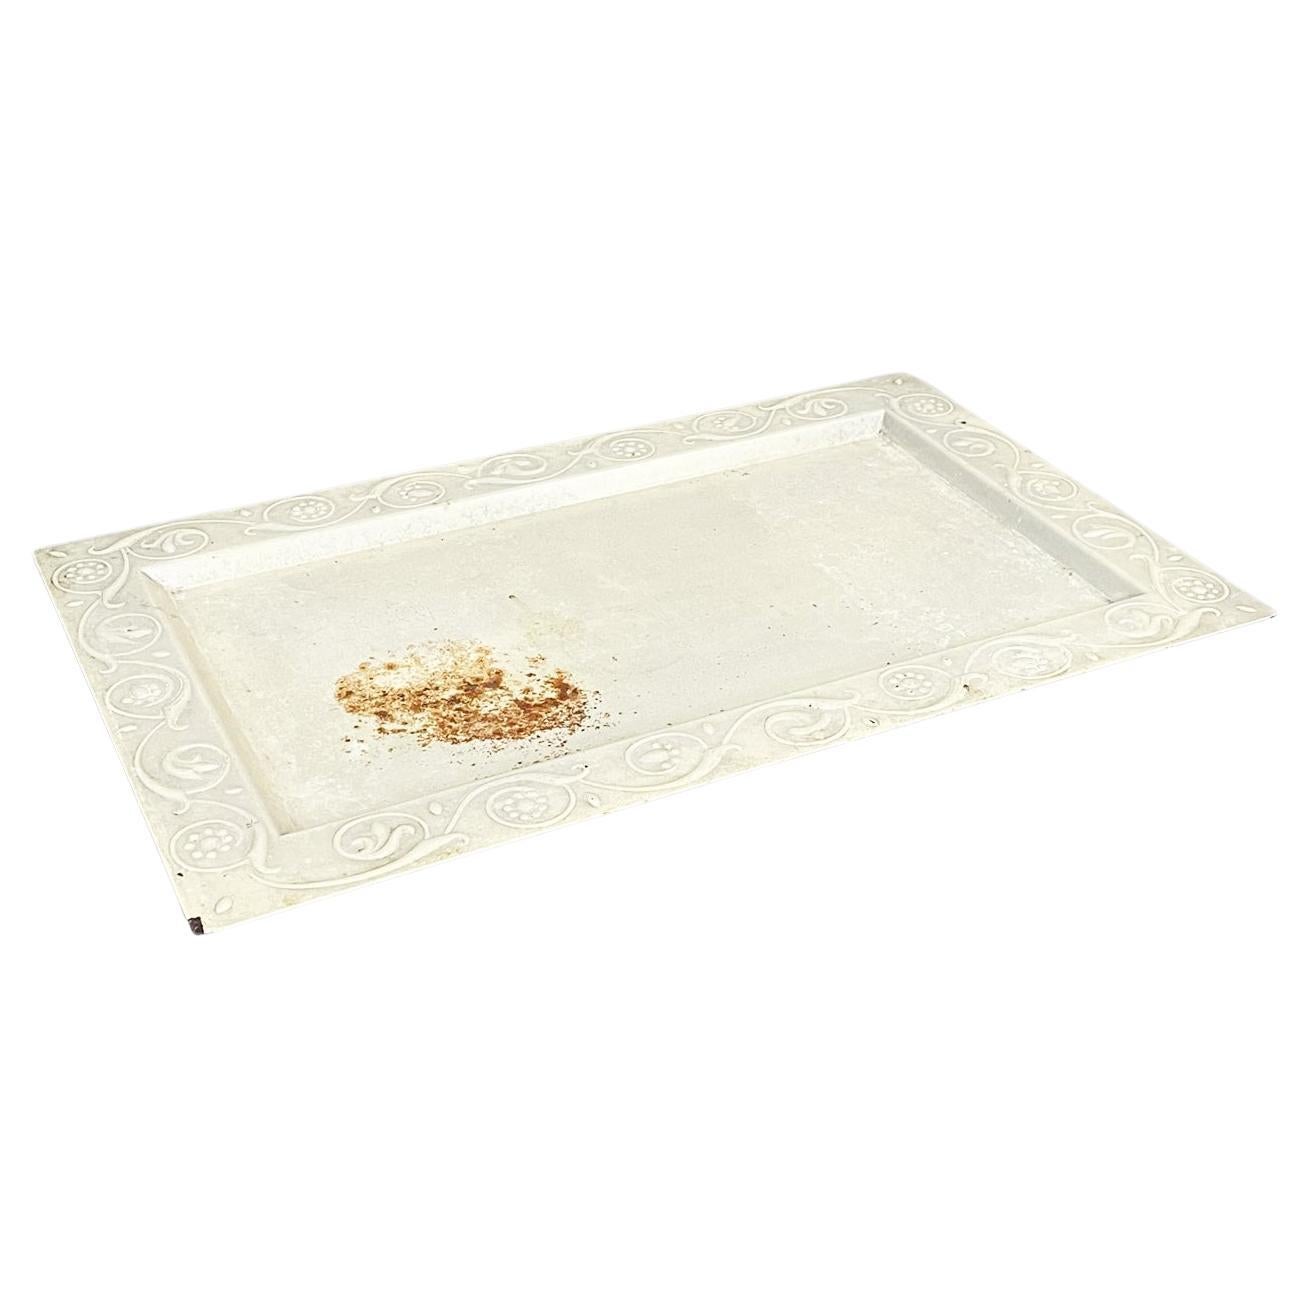 Italian Modern Tray in Beige Iron with Curls Pattern Decorations, 1990s For Sale